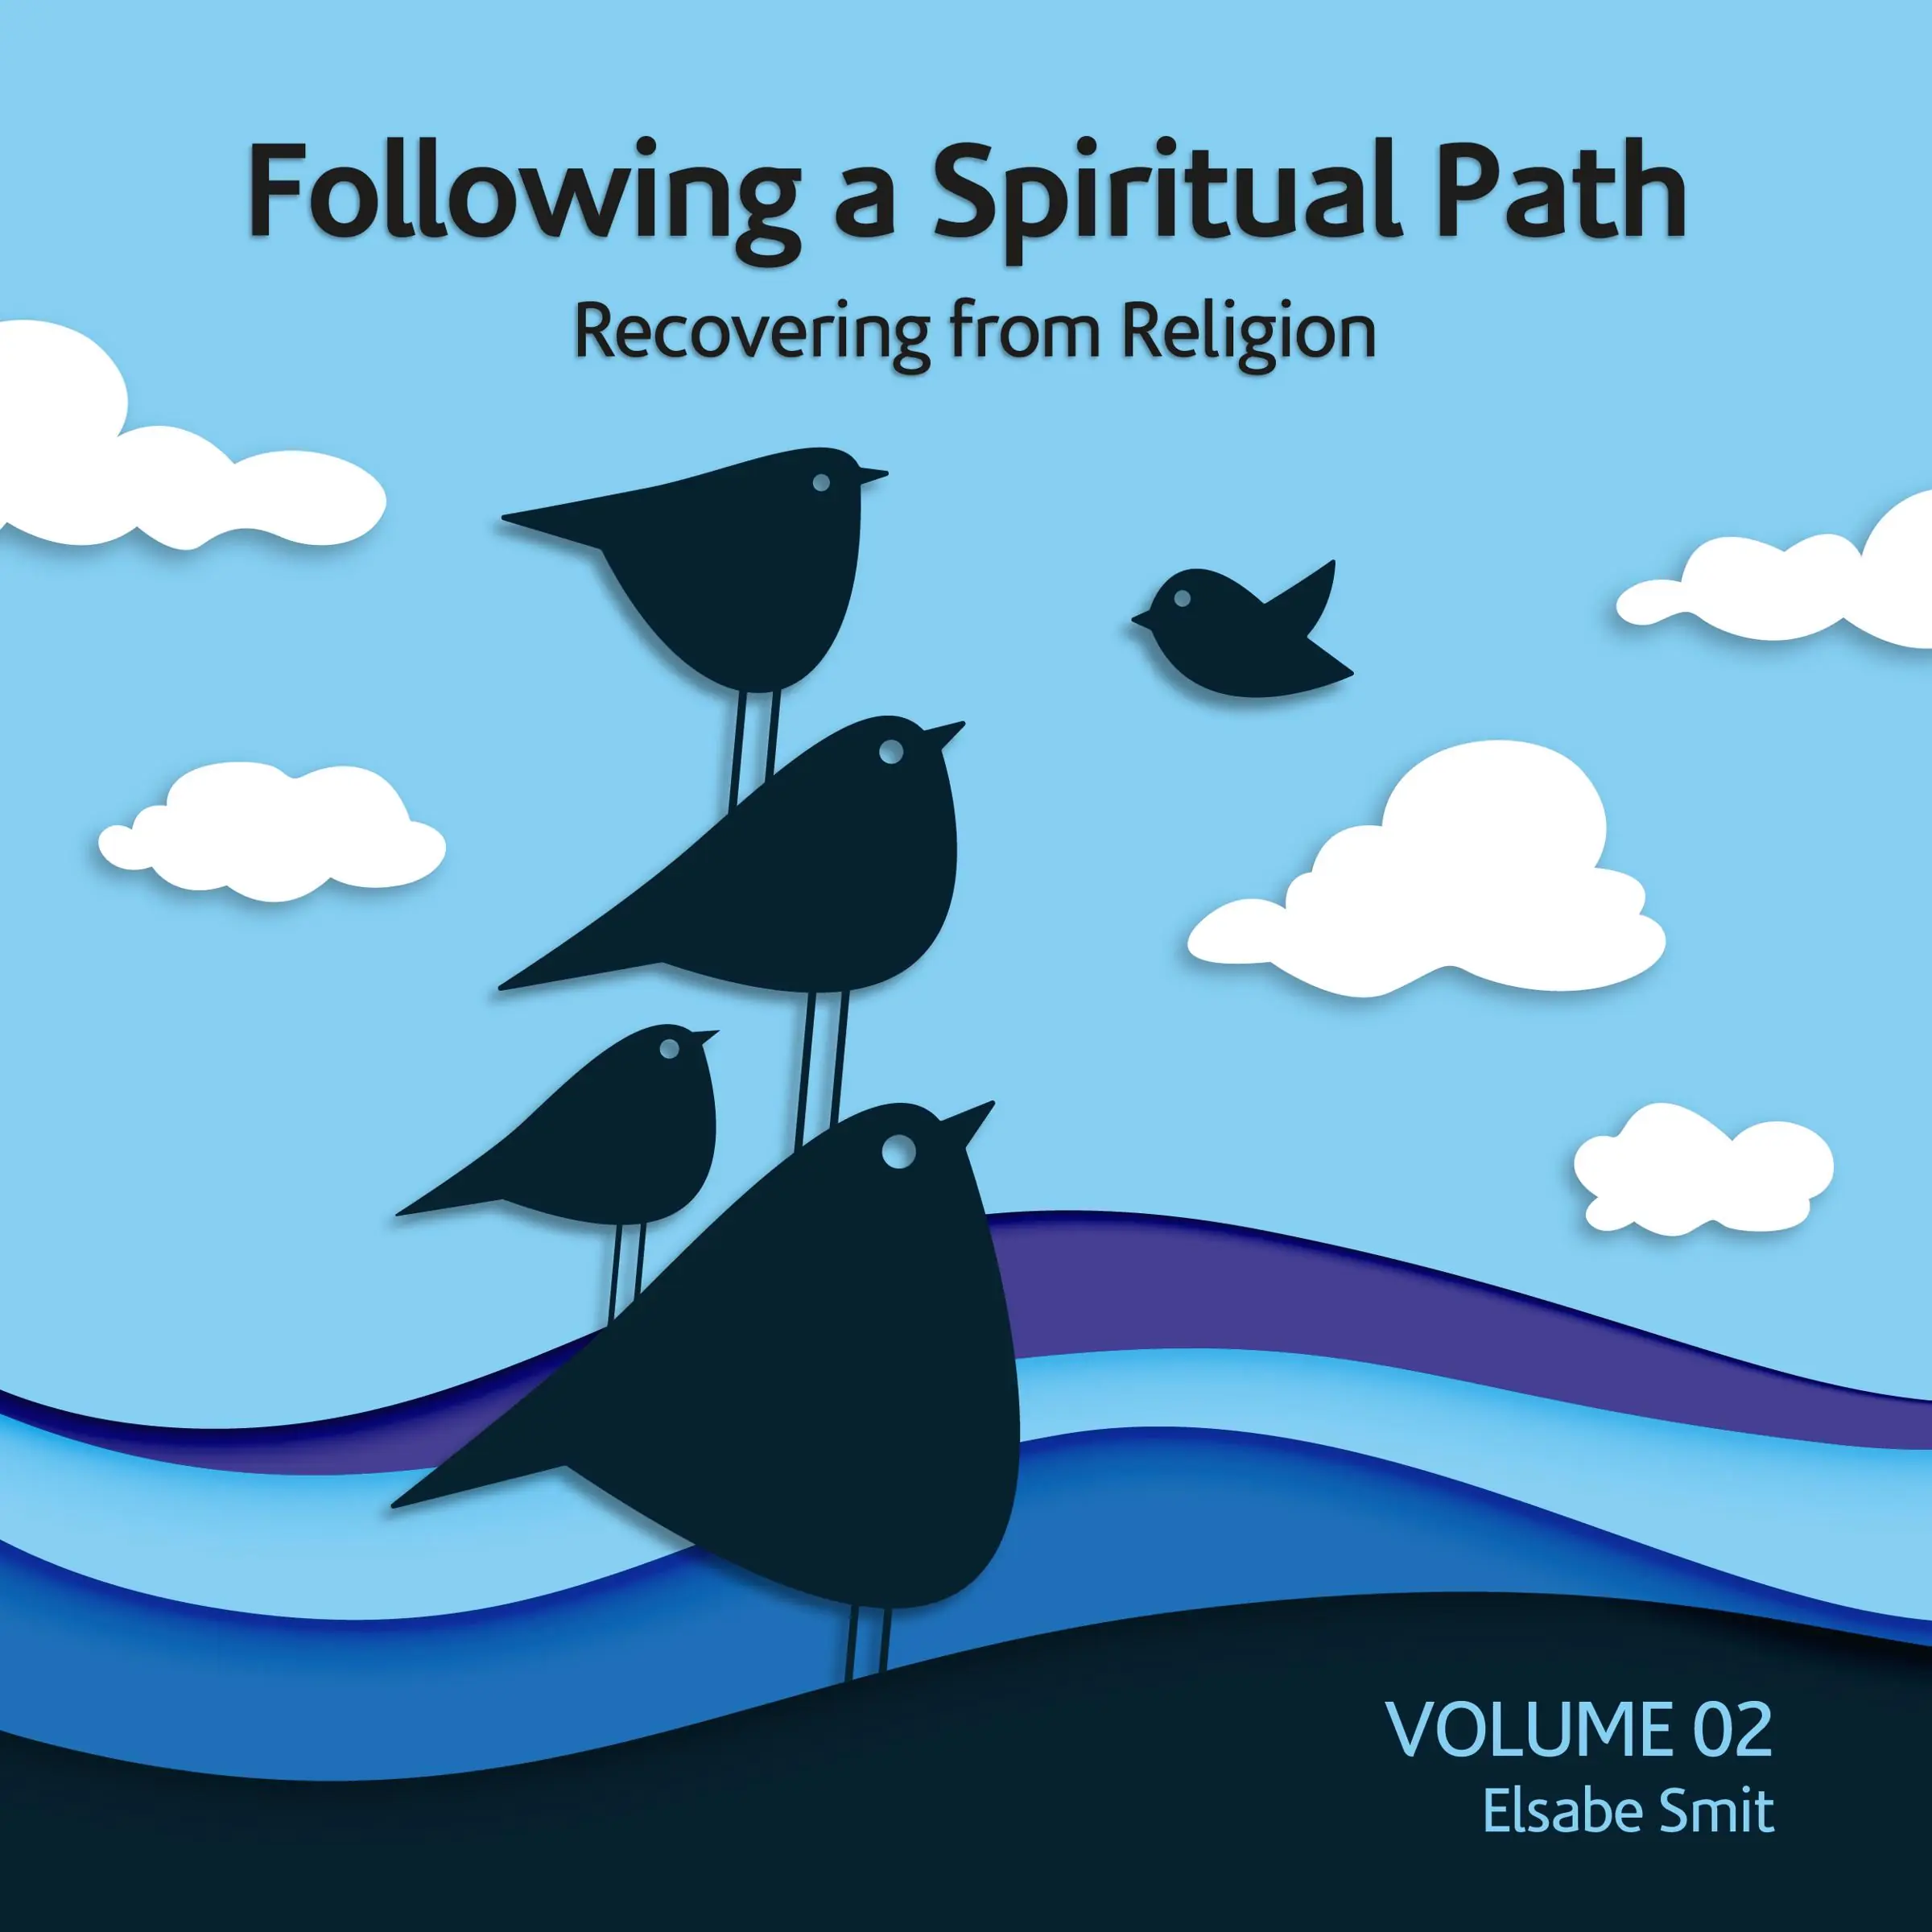 Following a Spiritual Path: Recovering from Religion Vol 2 Audiobook by Elsabe Smit